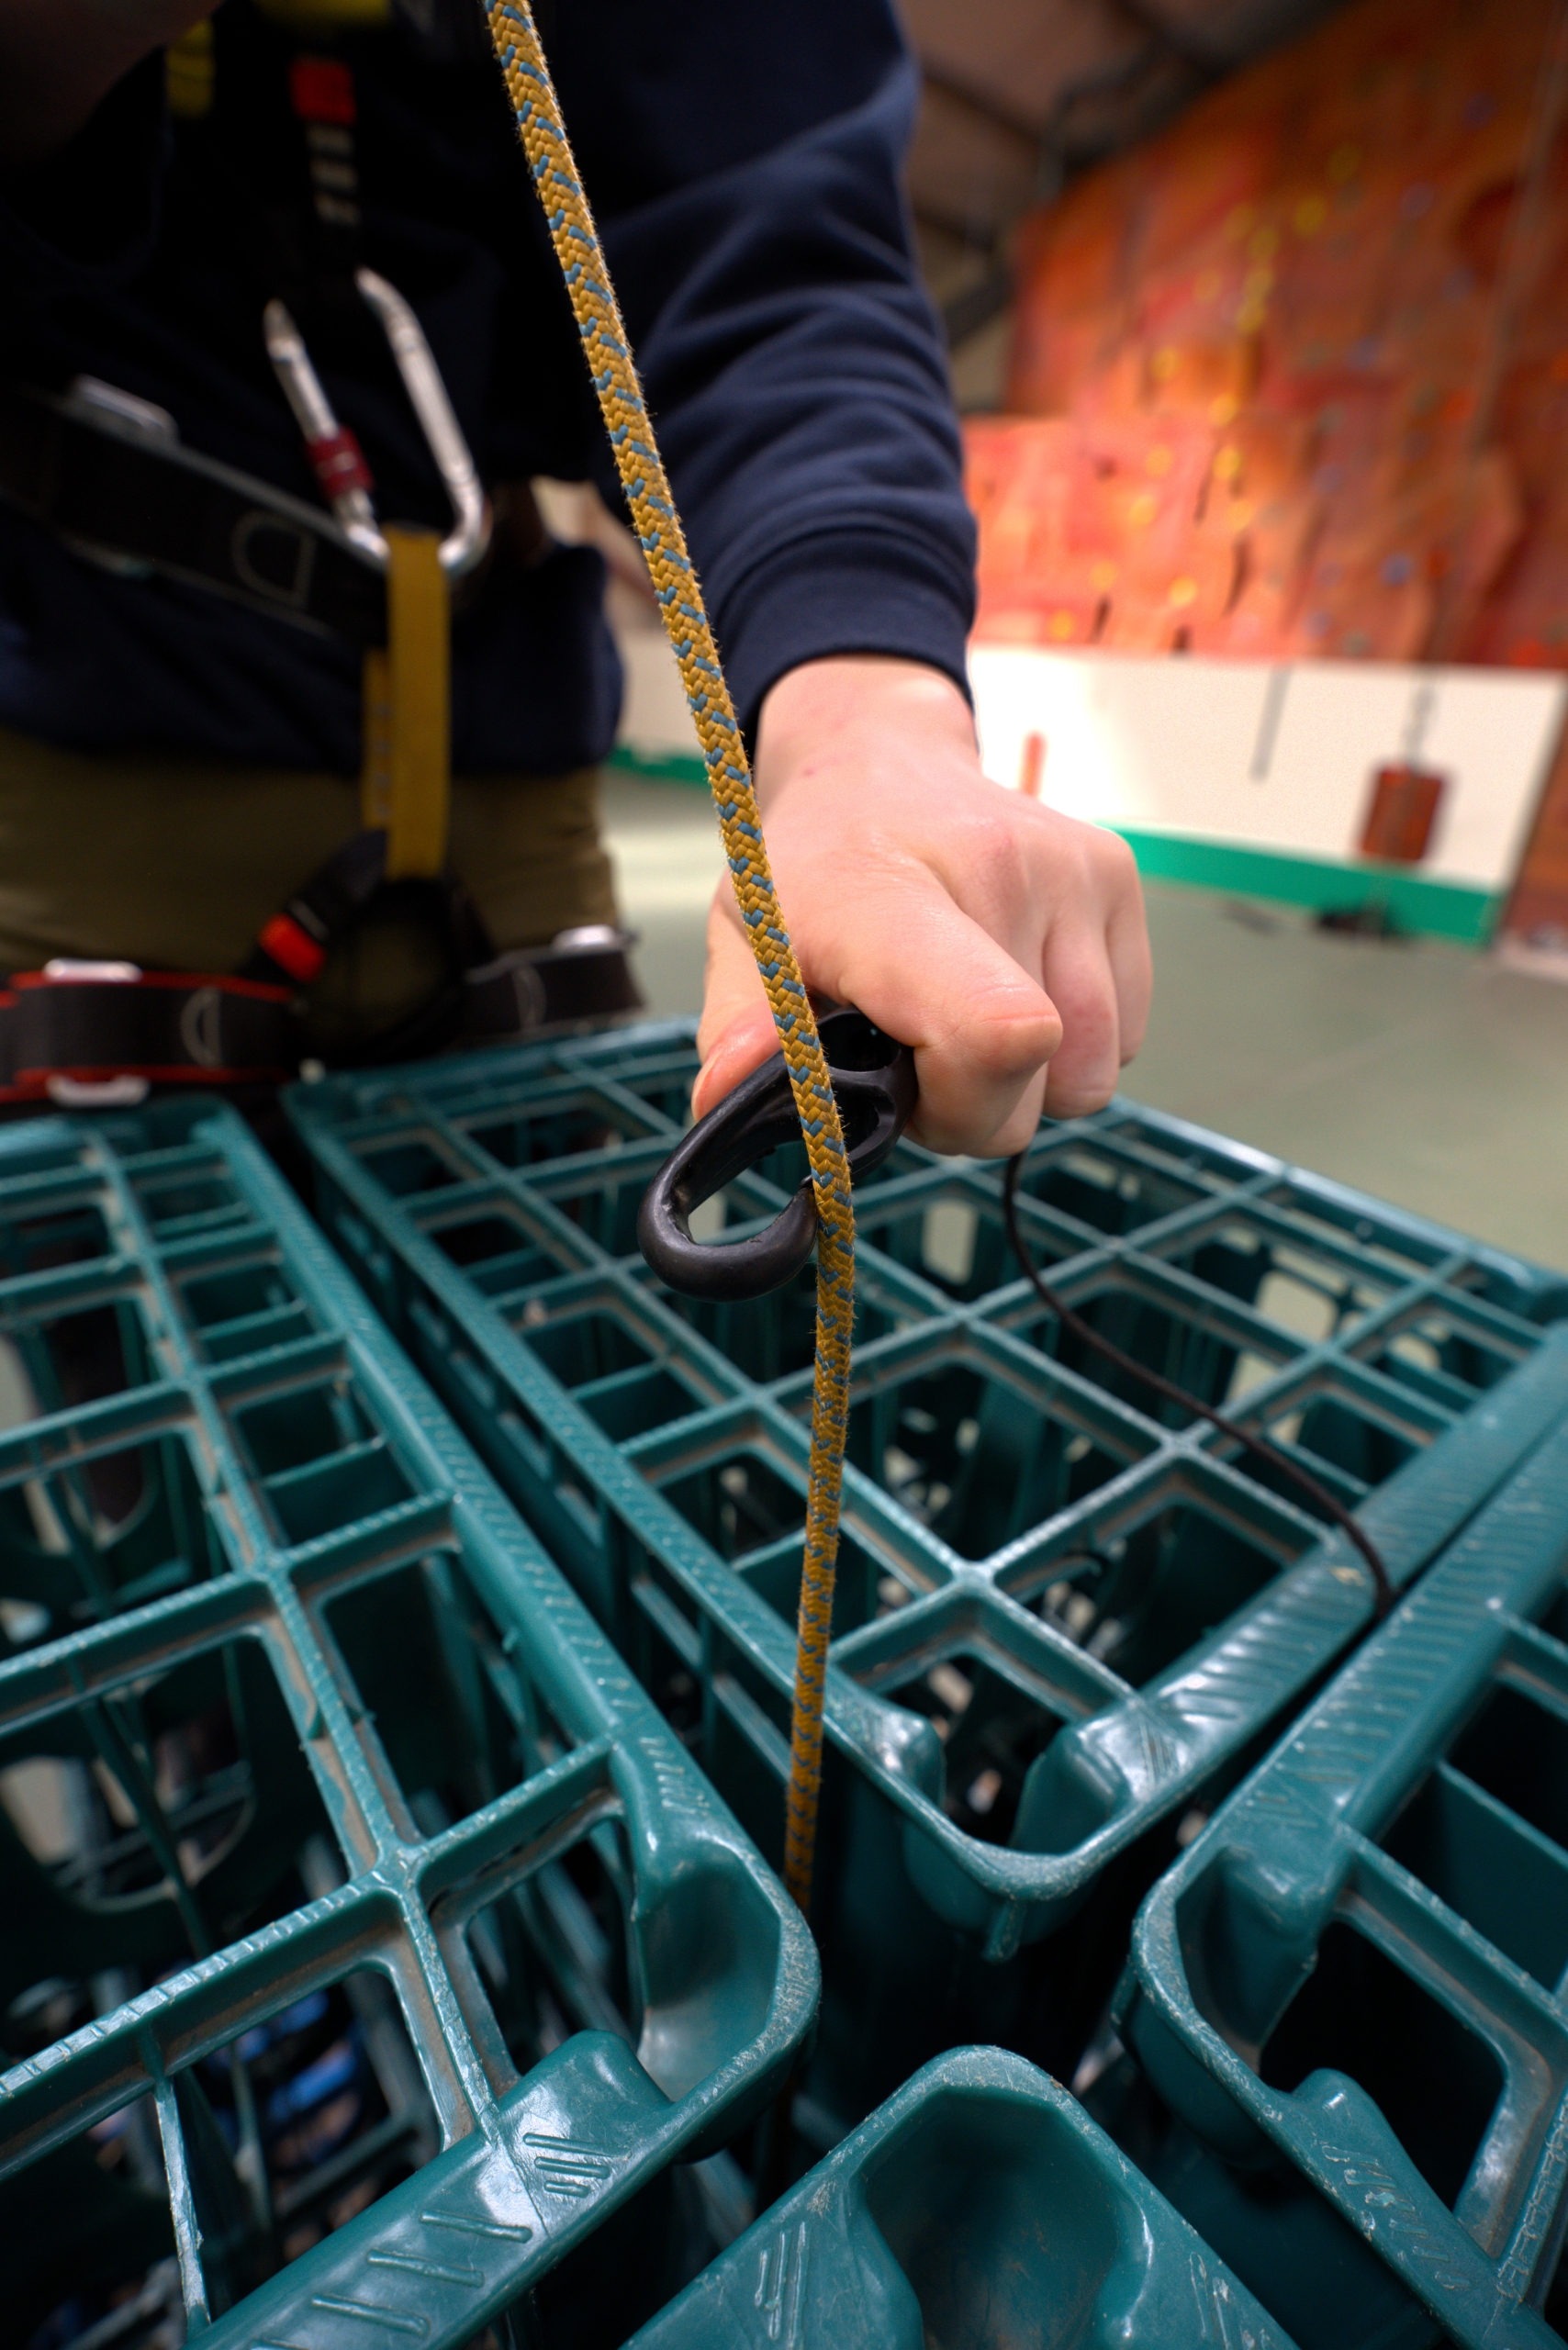 The foreground shows plastic milk crates, with a rope extending out from the middle of them, where someone's hand is clipping a black clip onto the rope.